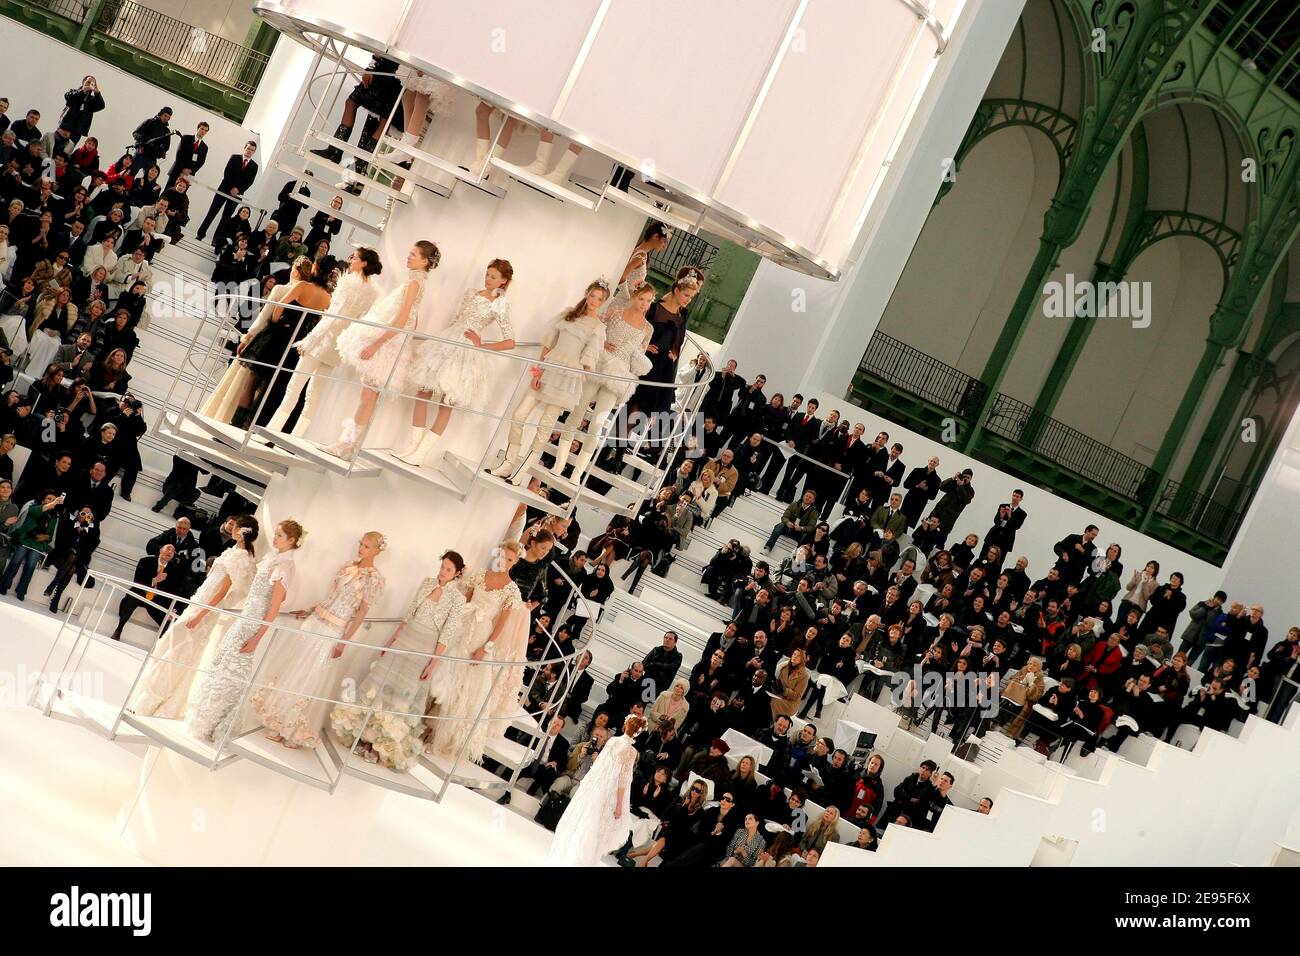 Chanel's Haute-Couture Spring-Summer 2006 fashion collection